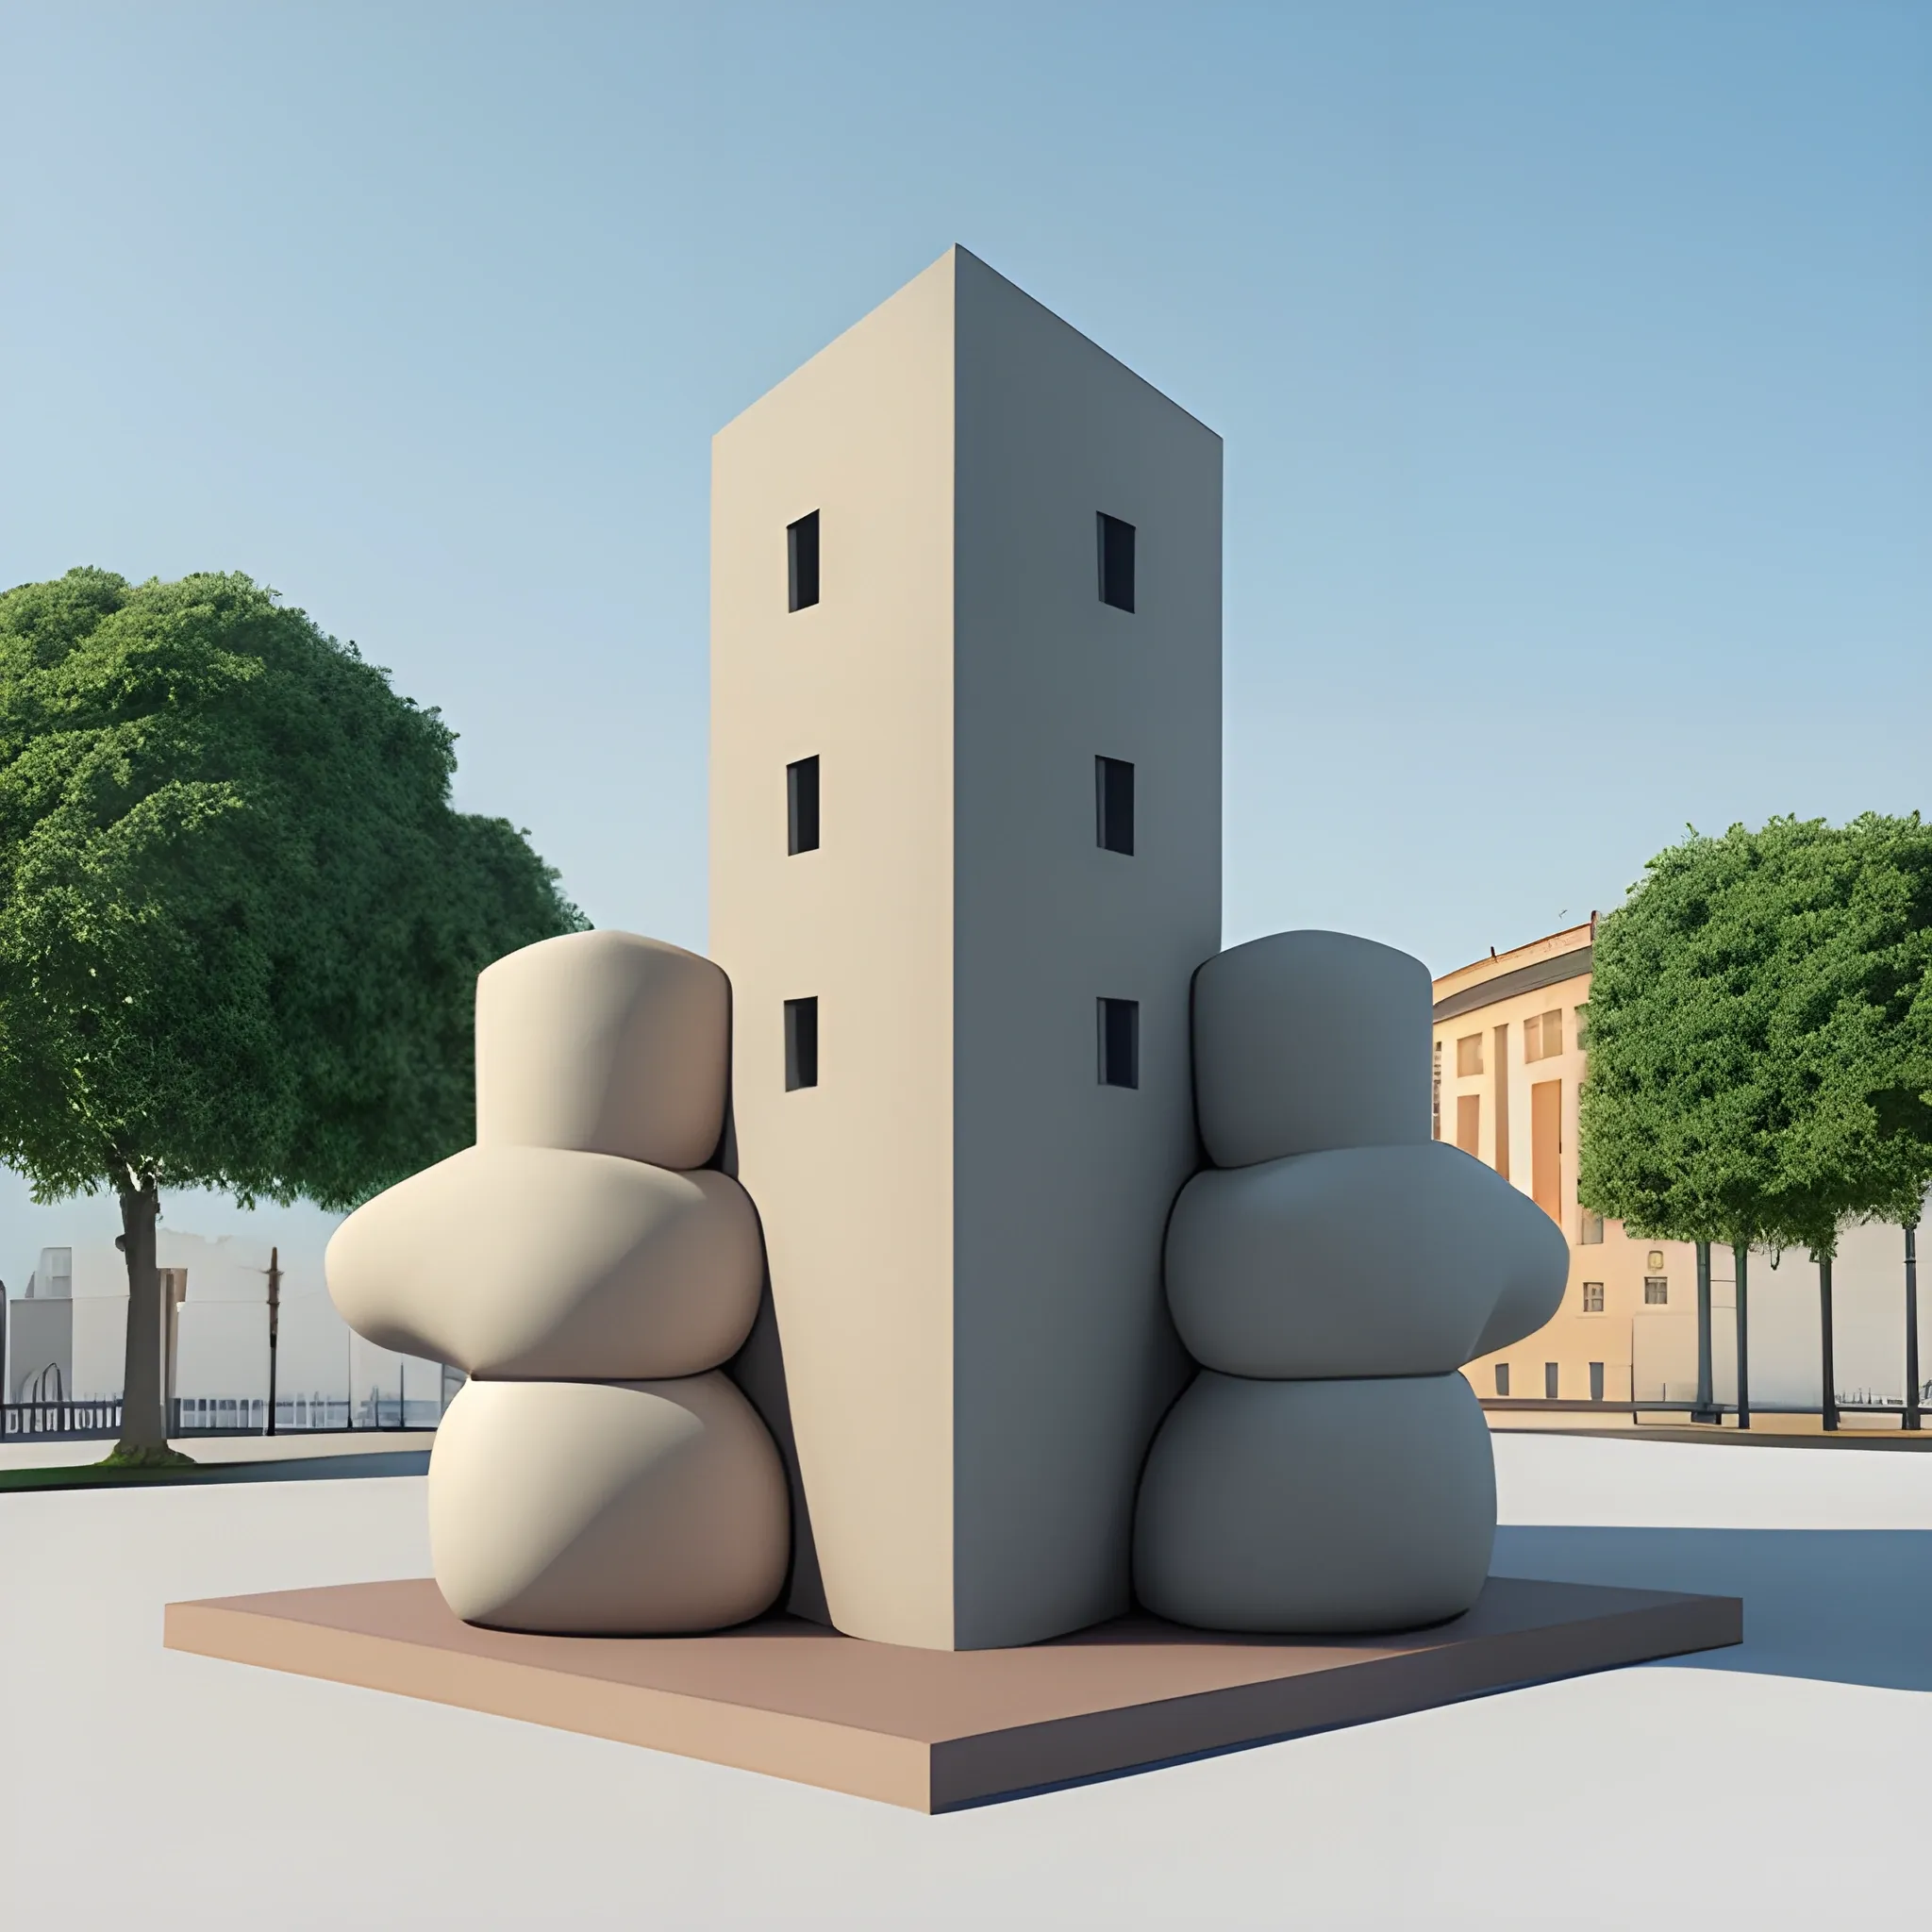 Create a monumental modern sculptured italian big dinner folk   in Claes Oldenburg style, simple design as Bahaus style, minimal, geometric simplicity, feature with gown, toga concept ,Bronce material surface and brick base, asymetric composition,   big locomotion expression,  blue sky background, pretty detailed HD render, classic base, fountain, 3D, 3D, 3D